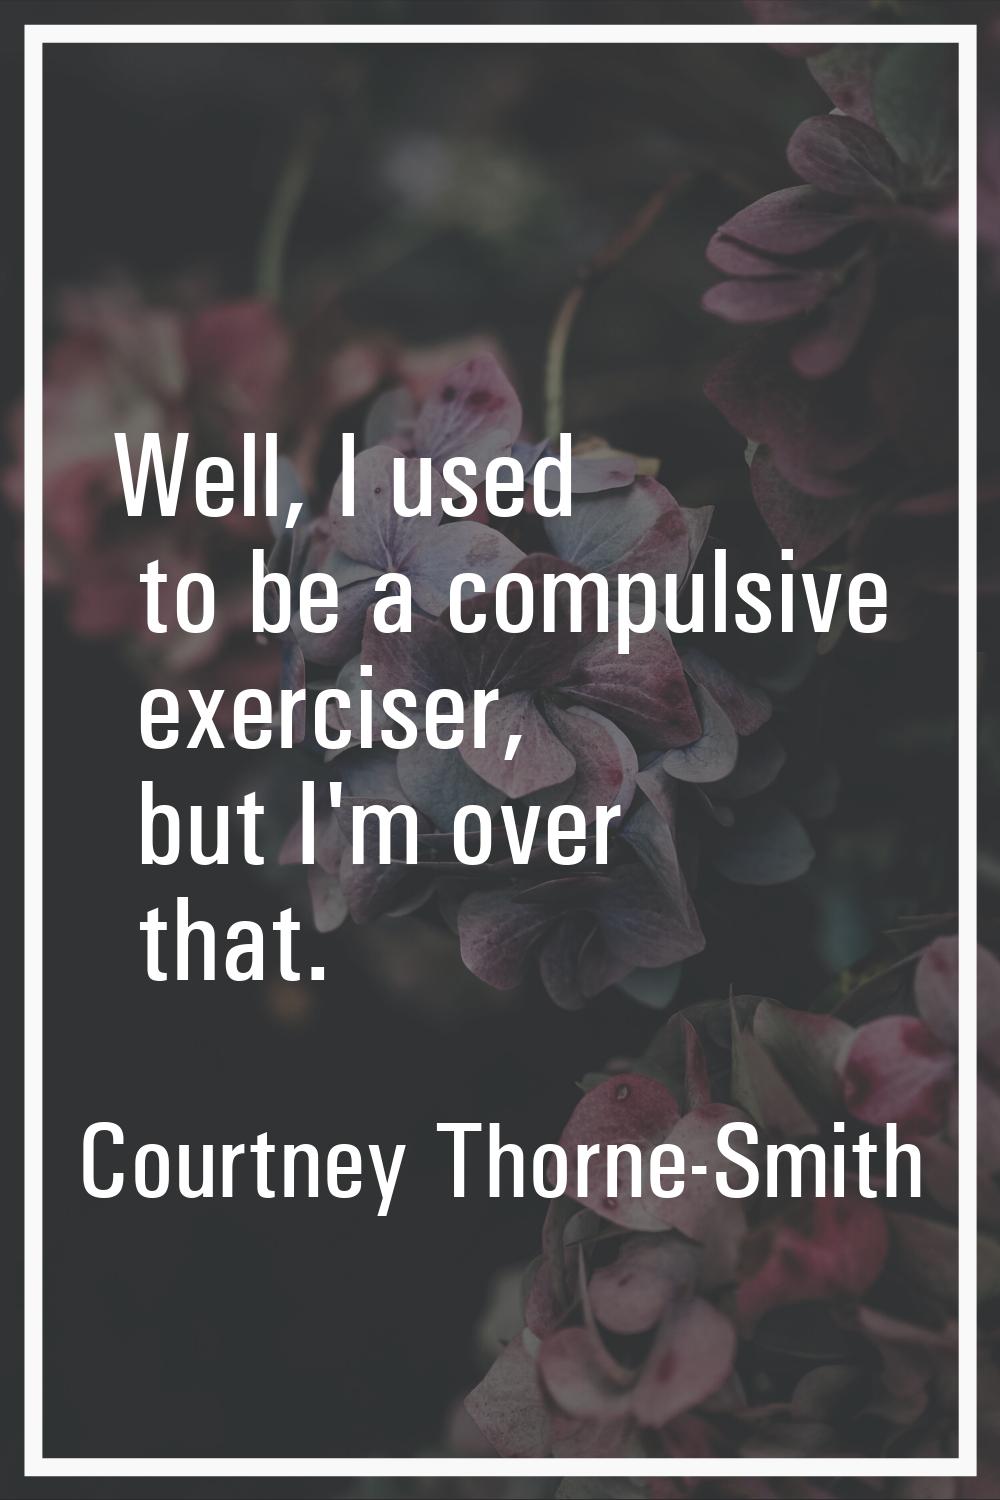 Well, I used to be a compulsive exerciser, but I'm over that.